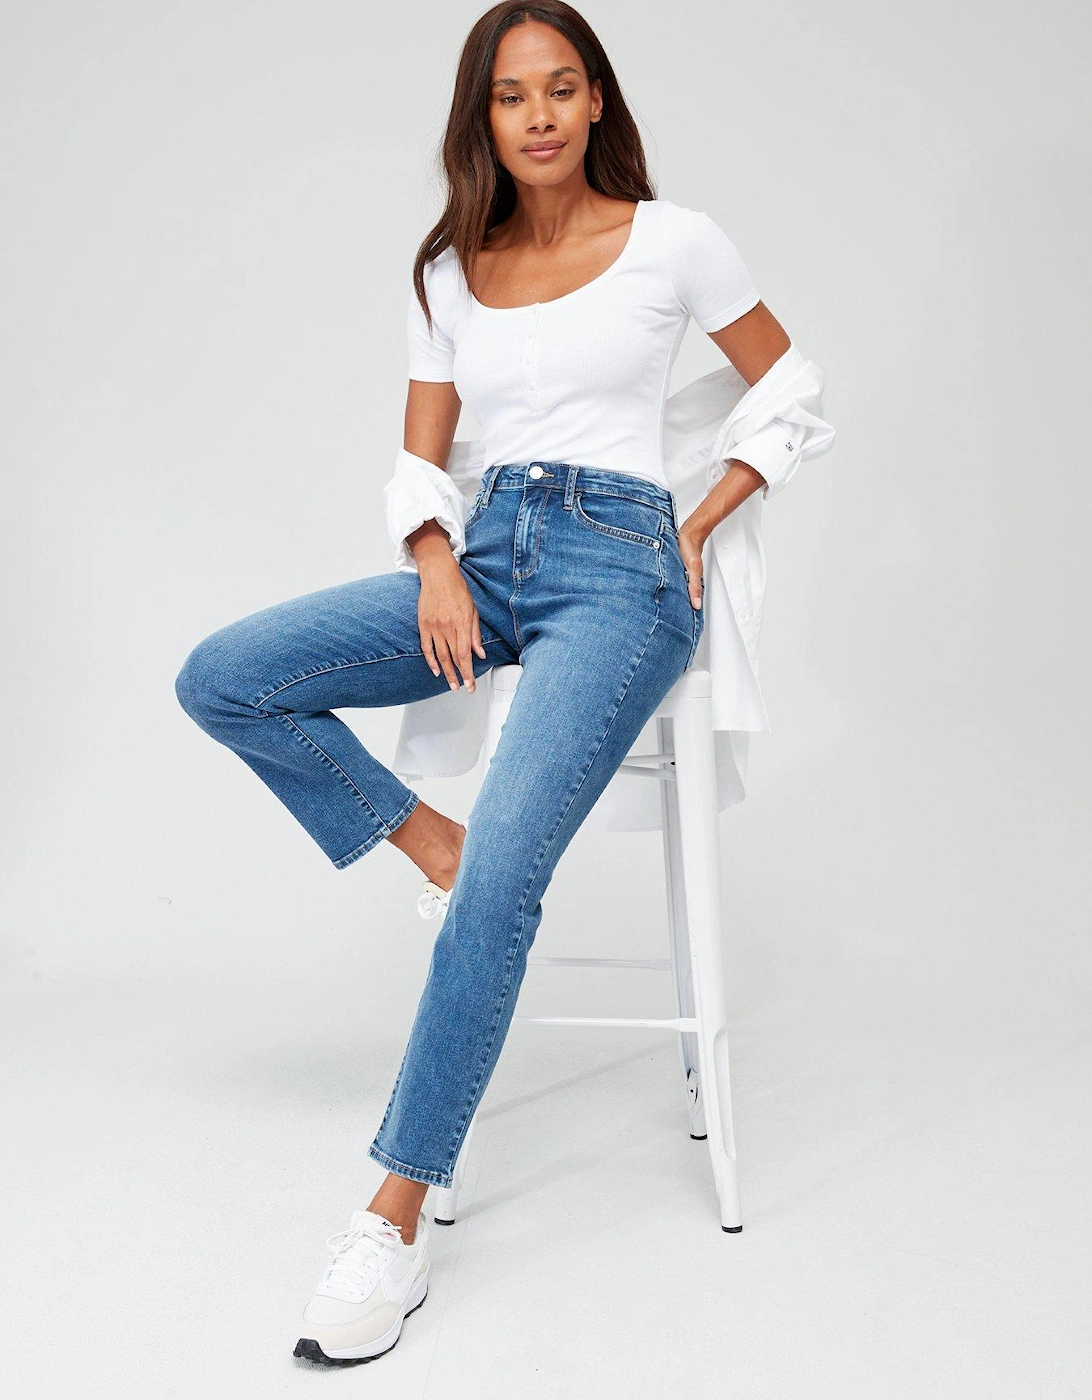 Authentic Straight Leg Jeans With Stretch - Blue